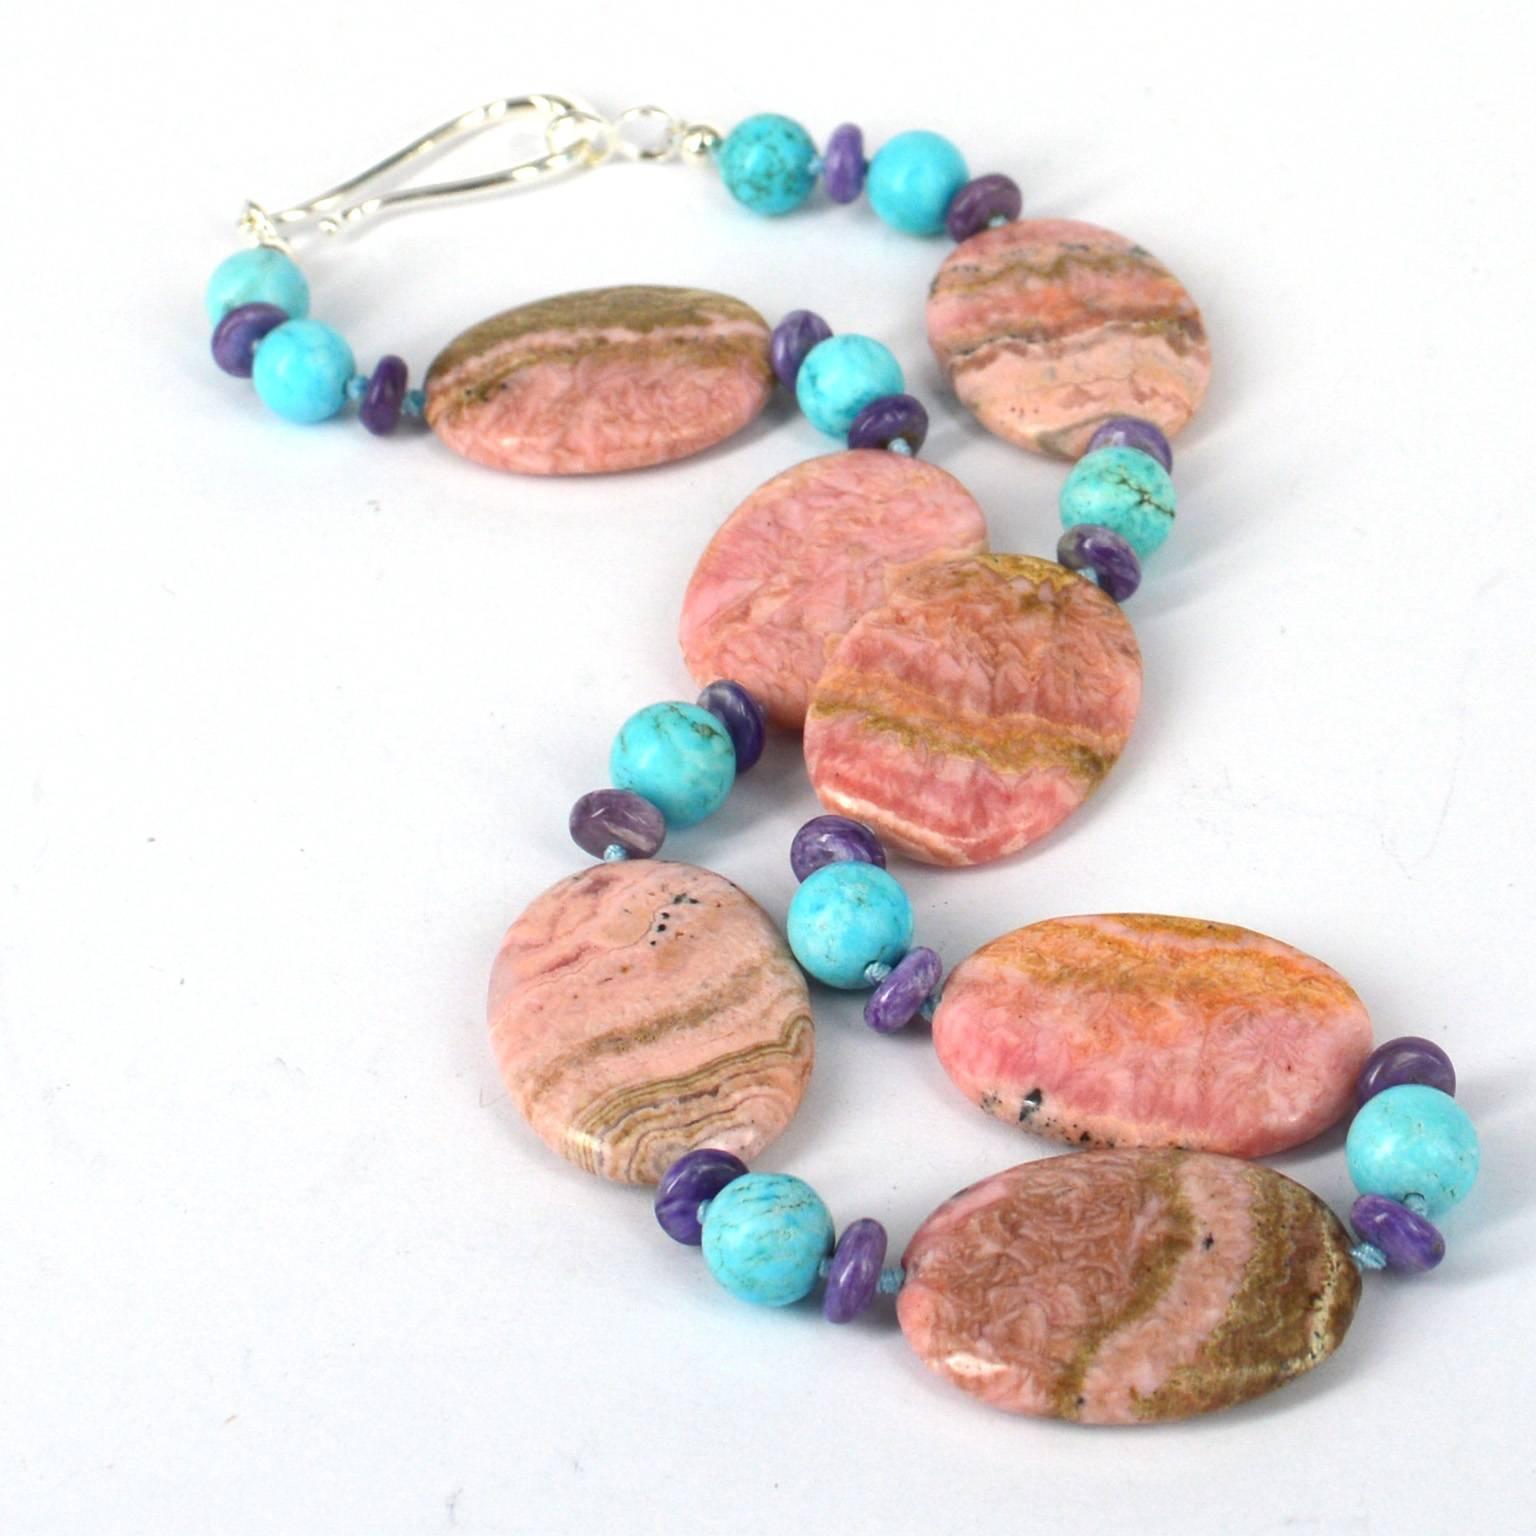 Rhodochrosite 35x25mm with 10mm Natural Hubei Turquoise and 8x3mm Charoite rondel beads, hand knotted on Aqua thread for strength and durability with a 55cm Sterling Silver Hook Clasp.
Finished Necklace measures 51cm